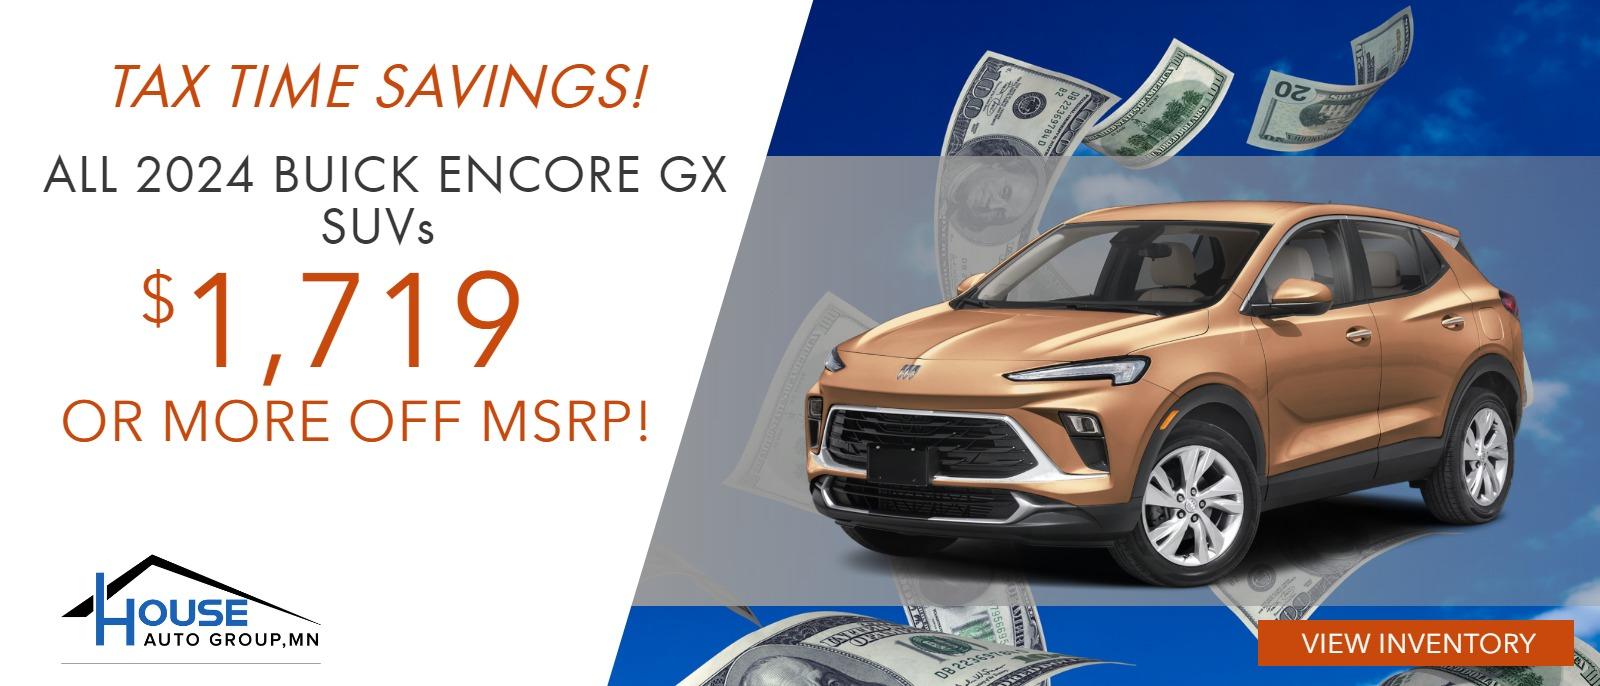 ALL 2024 Buick Encore GX SUVs - $1,719 Or More Off MSRP! (Includes $750 bonus cash for non-GM owners/lessees.)